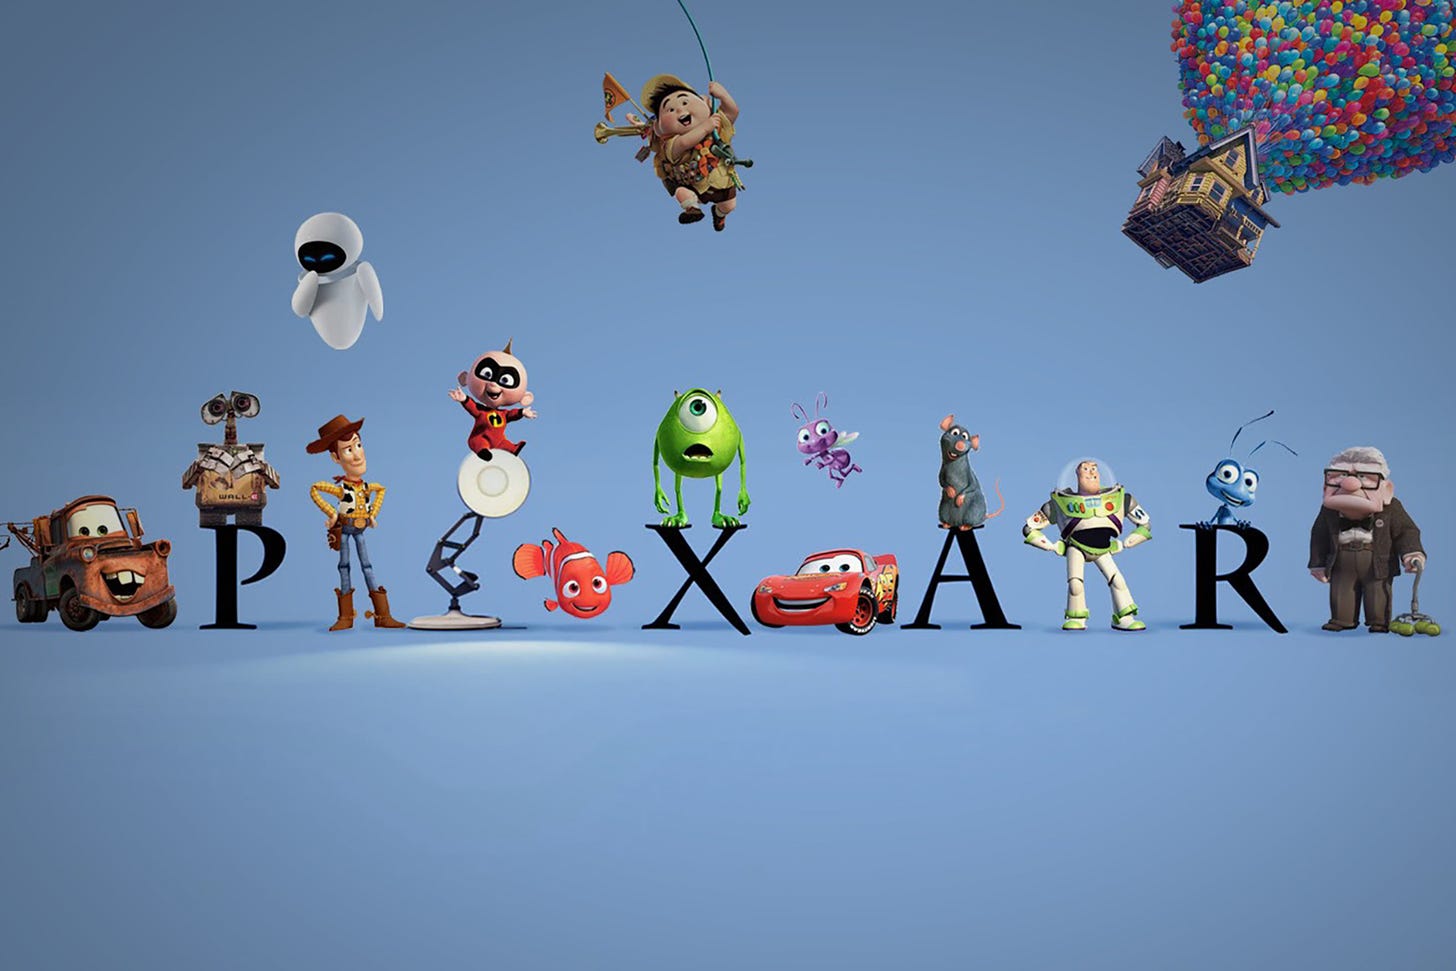 Pixar movies in order: The full Pixar Theory explained